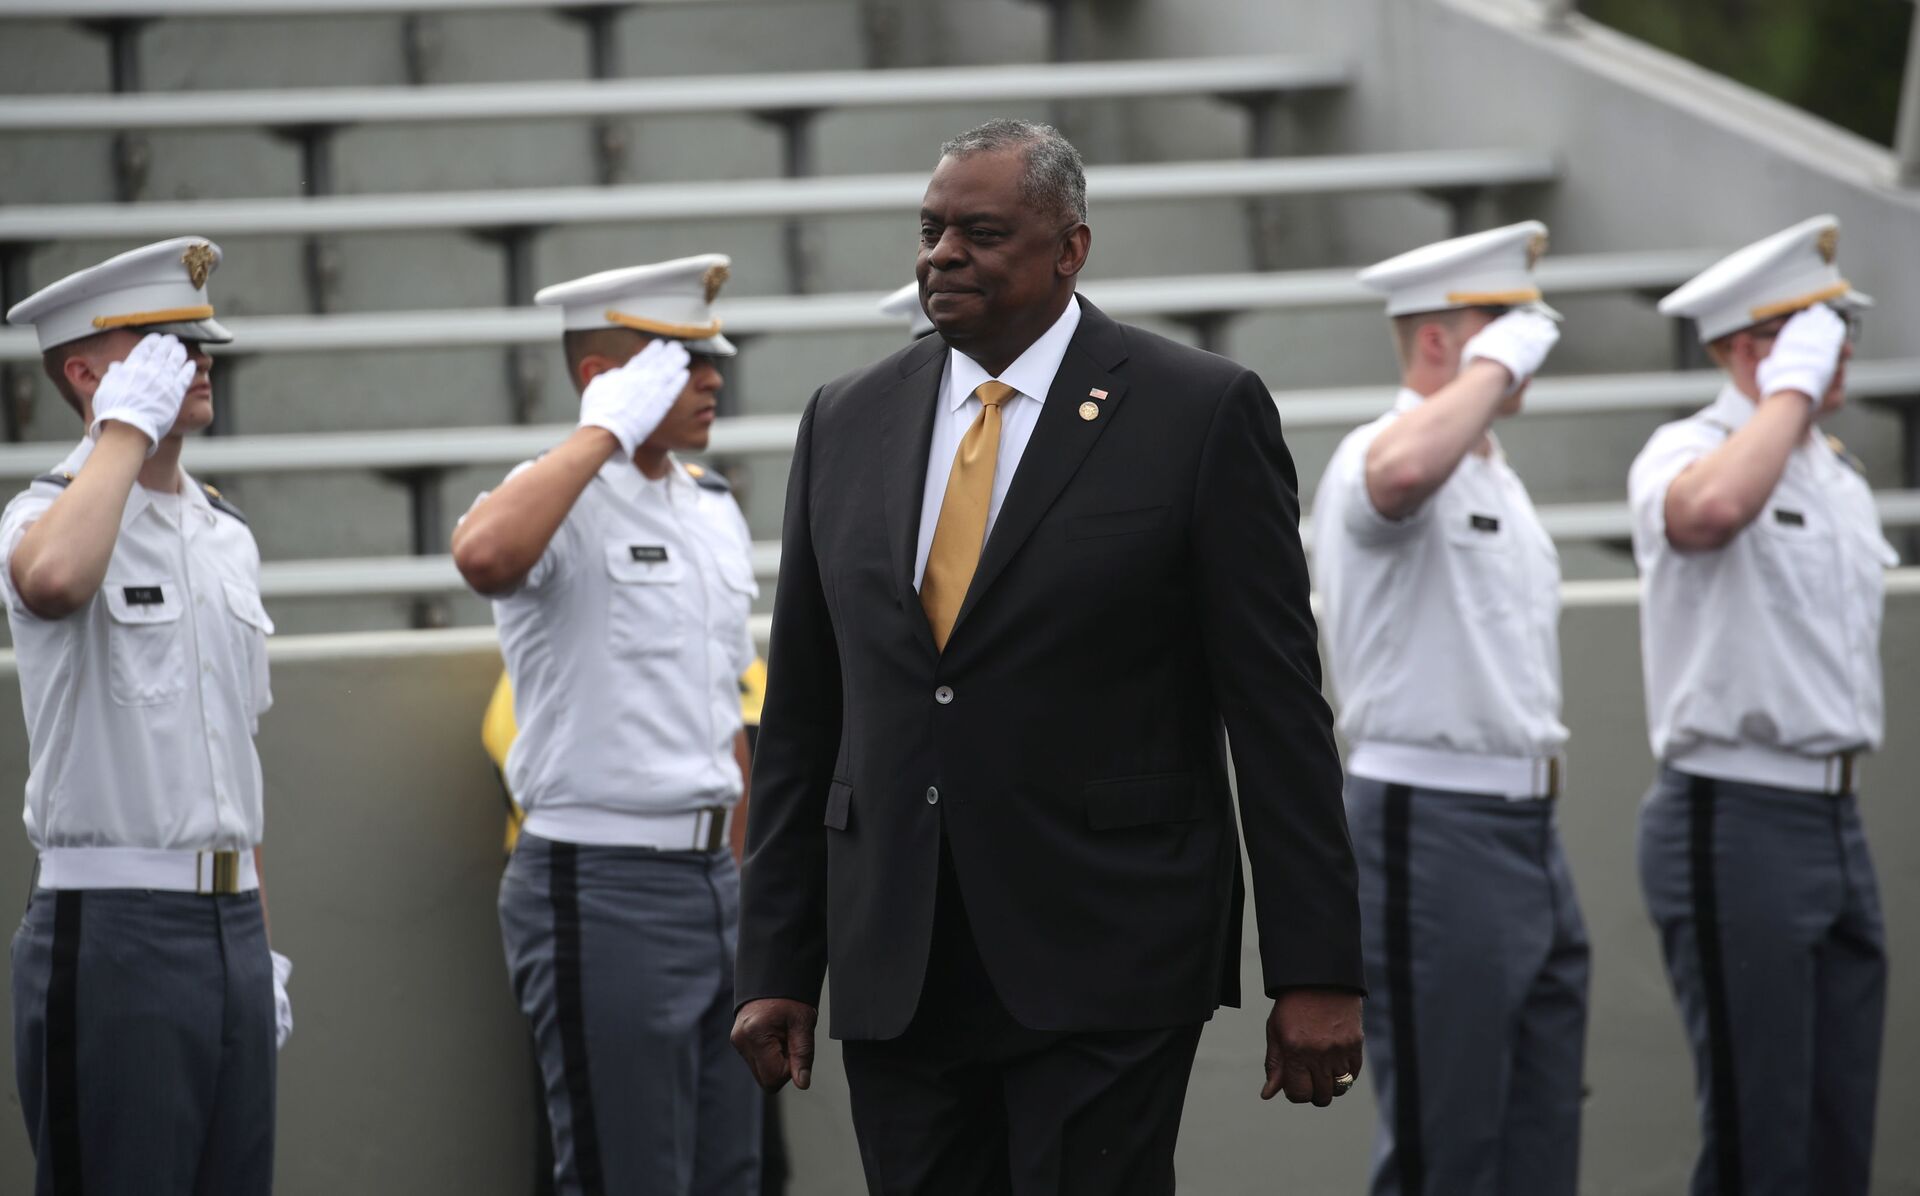 U.S. Secretary of Defense  Lloyd J. Austin III arrives for graduation ceremonies for the class of 2021 at the United States Military Academy (USMA) West Point, in Michie Stadium in West Point, New York, U.S., May 22, 2021. - Sputnik International, 1920, 10.09.2021